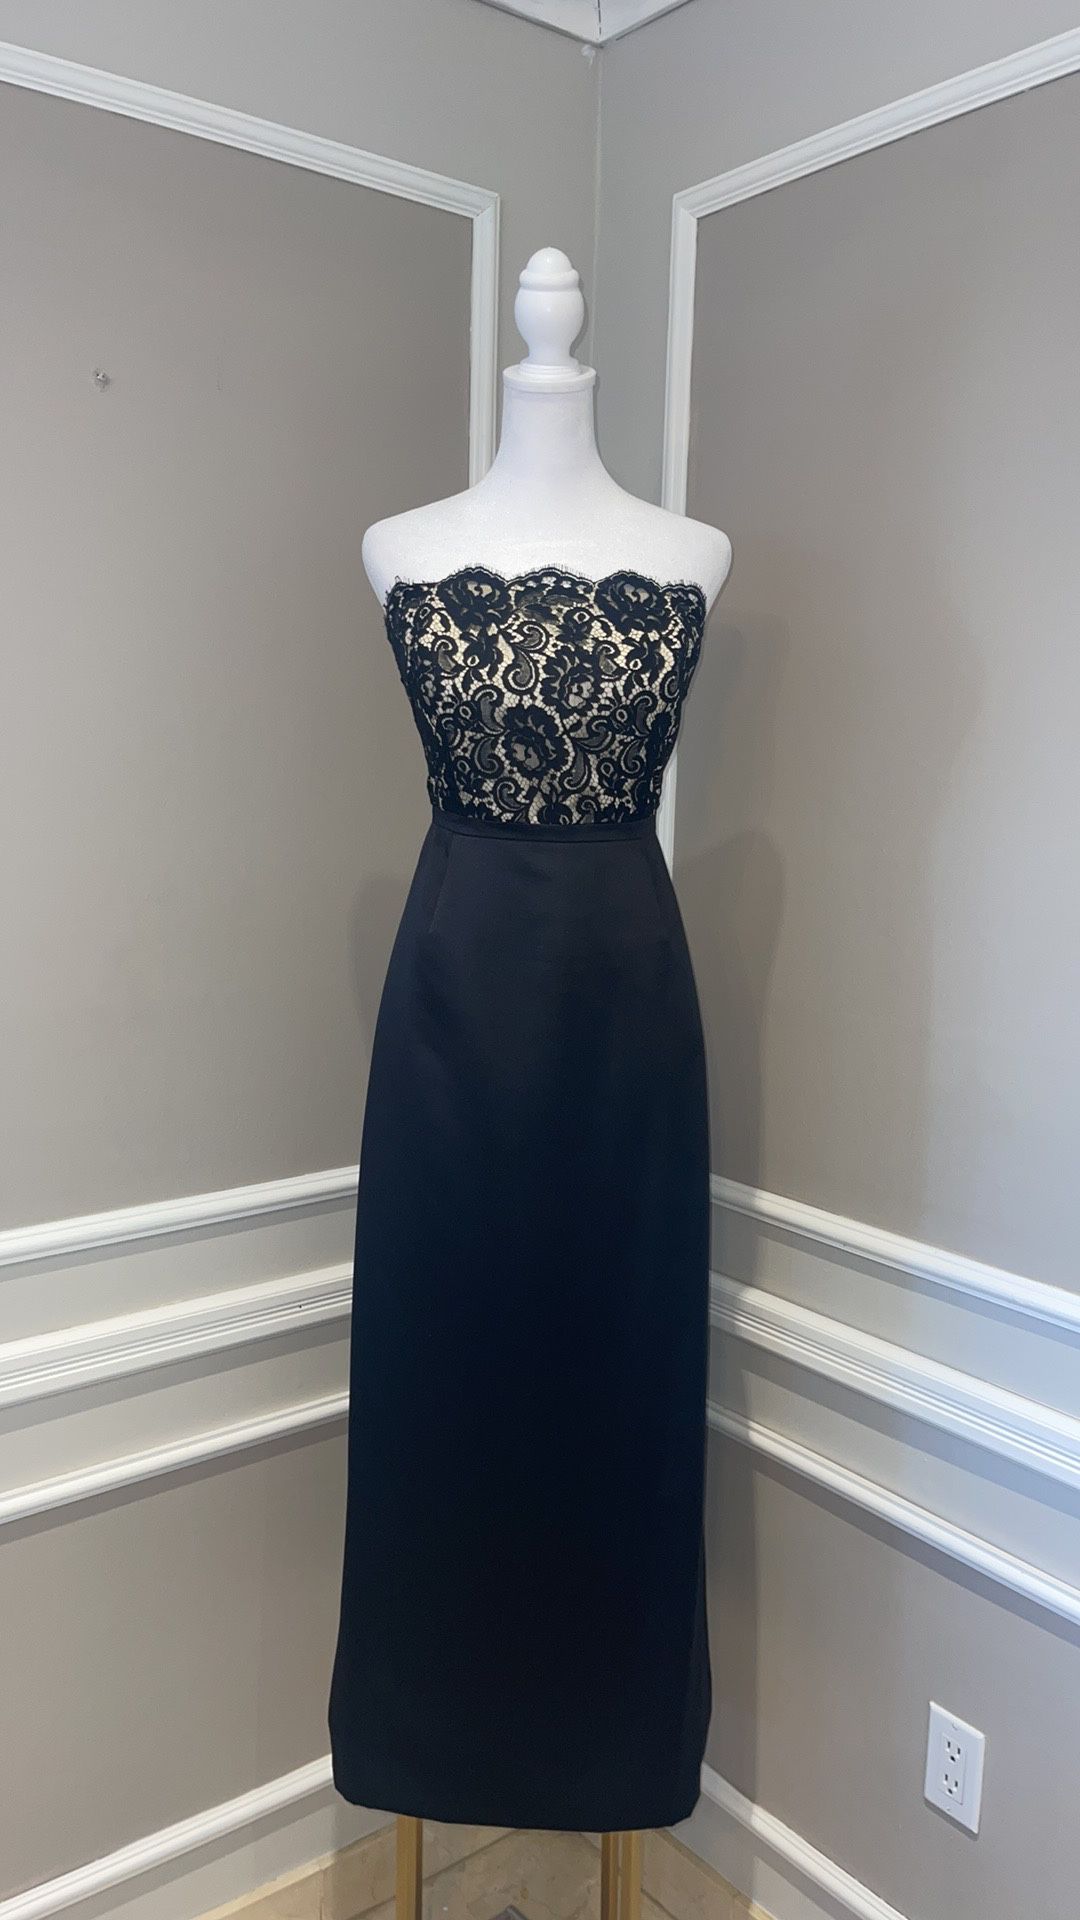 Ann Taylor Lace Bodice black satin evening gown – size 8. 